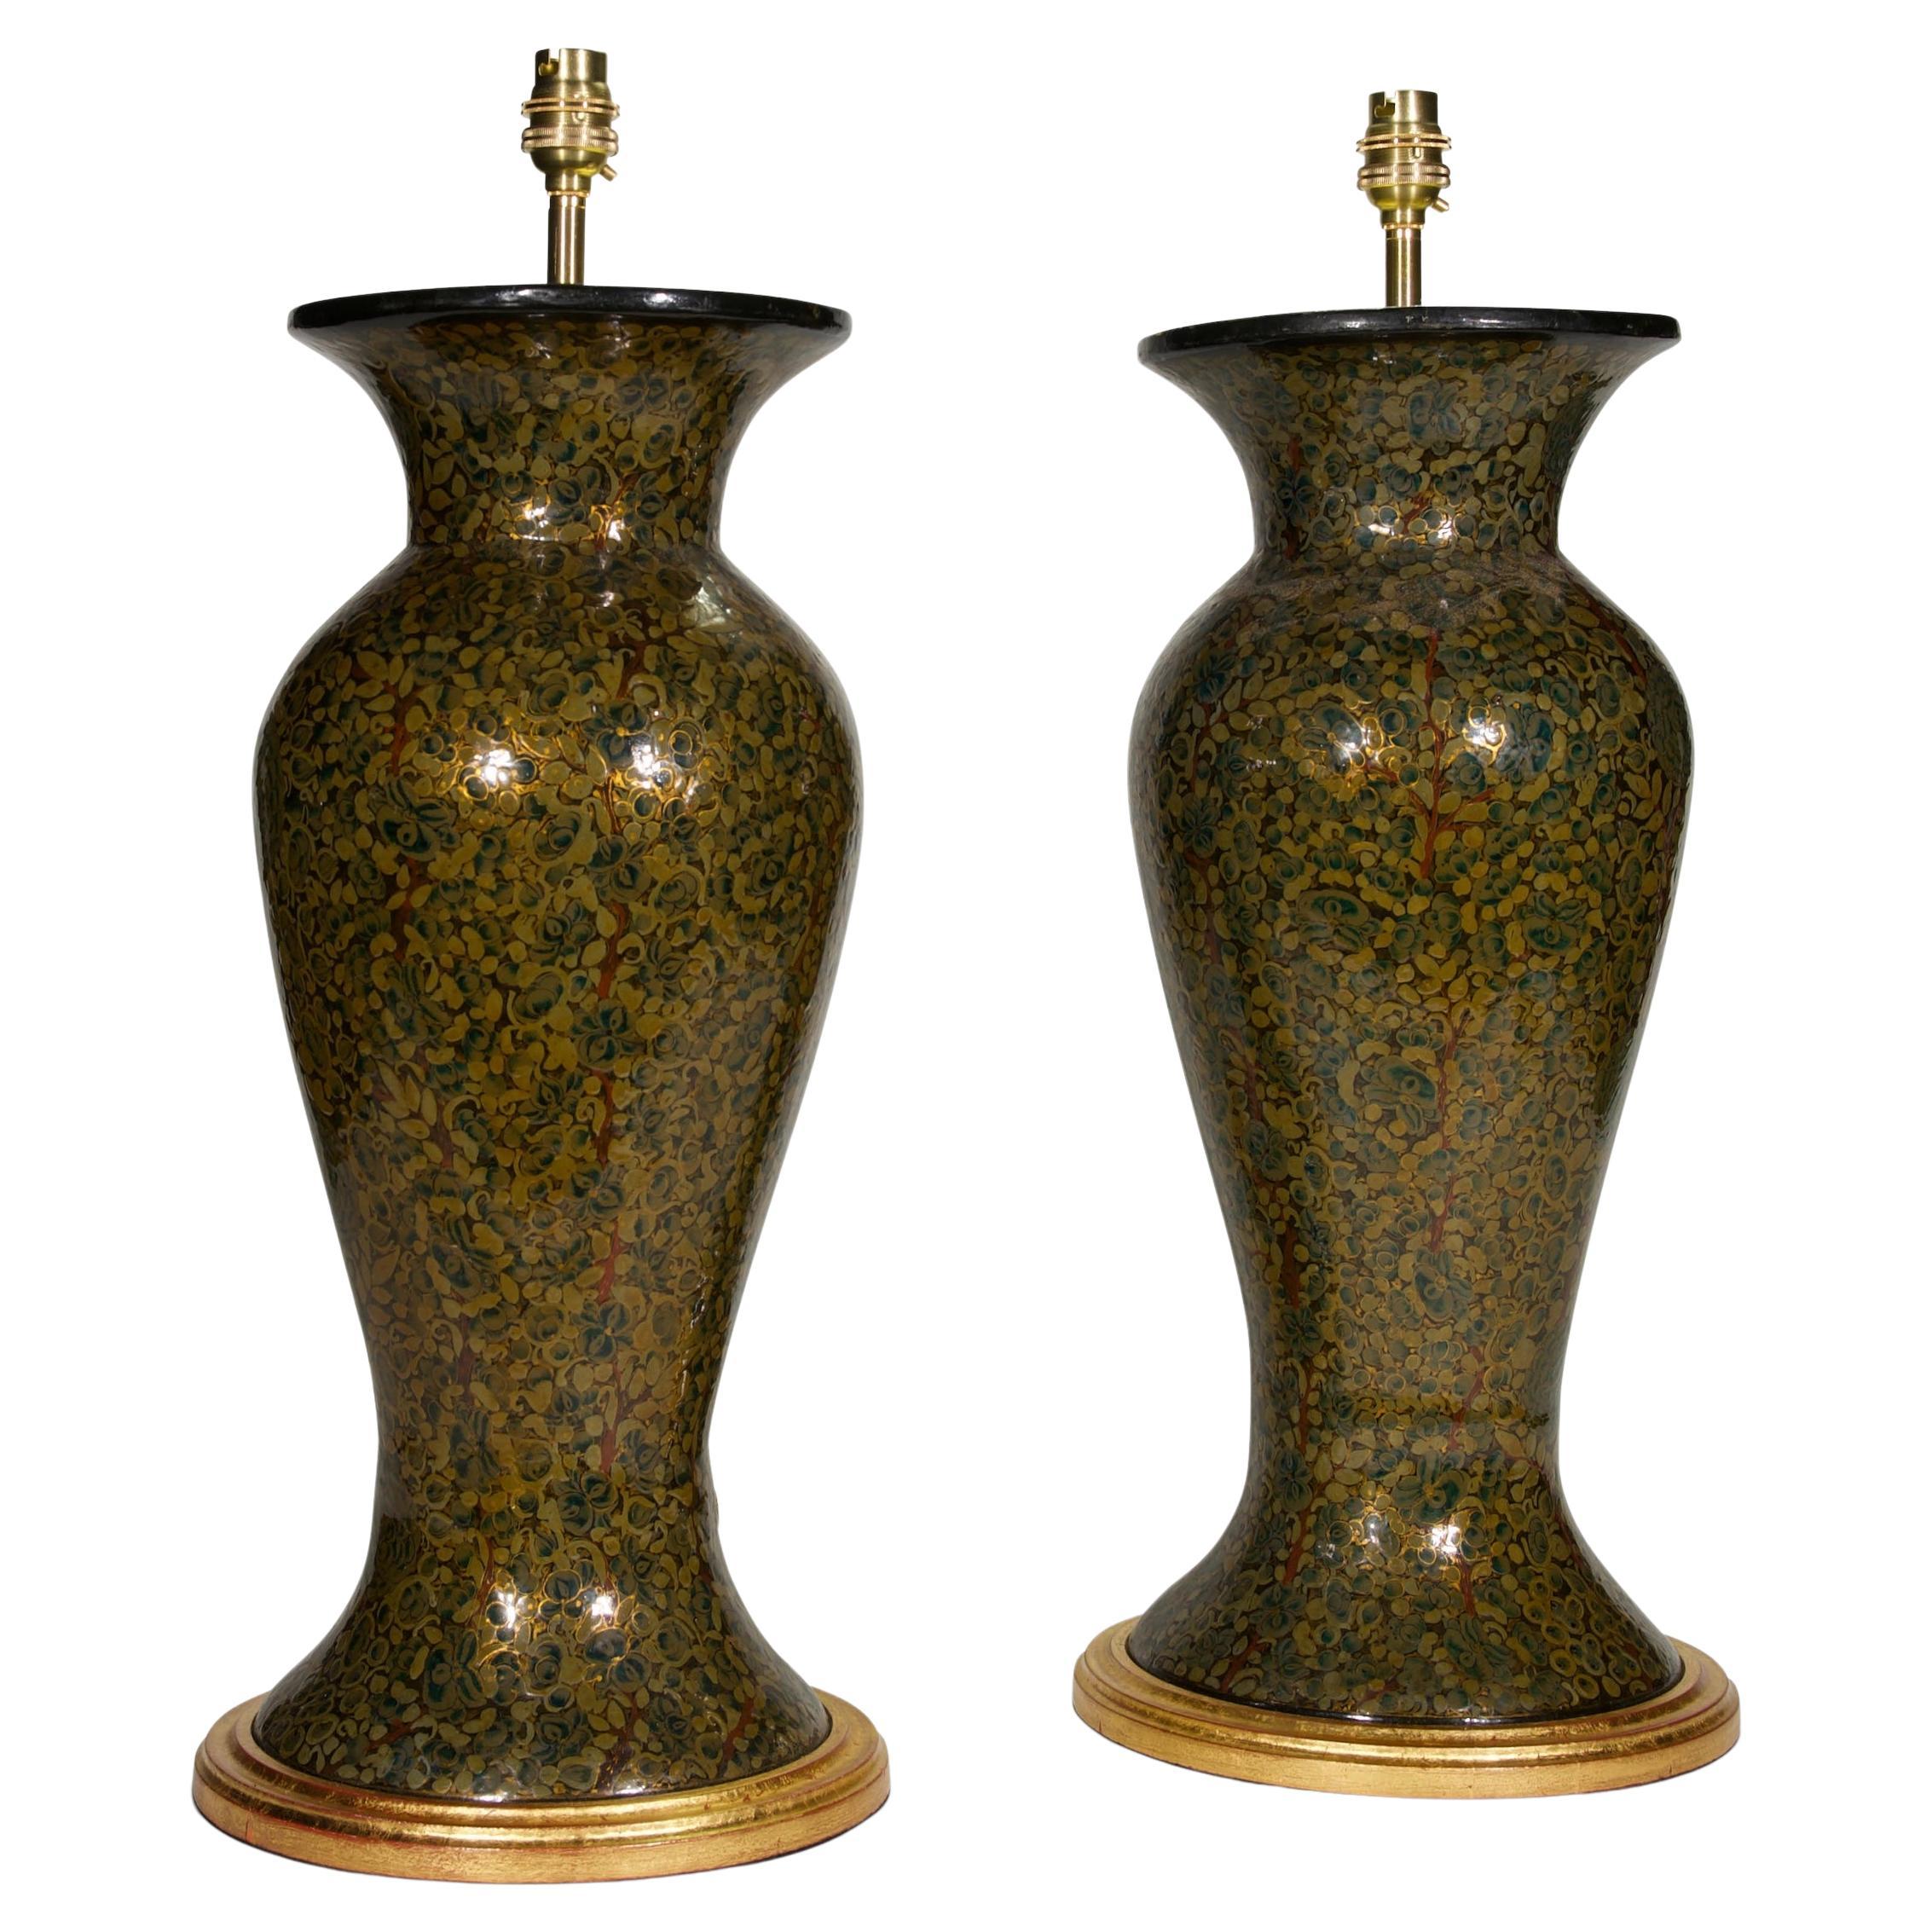 Pair of 20th Century Kashmiri Lacquered Gold Antique Table Lamps